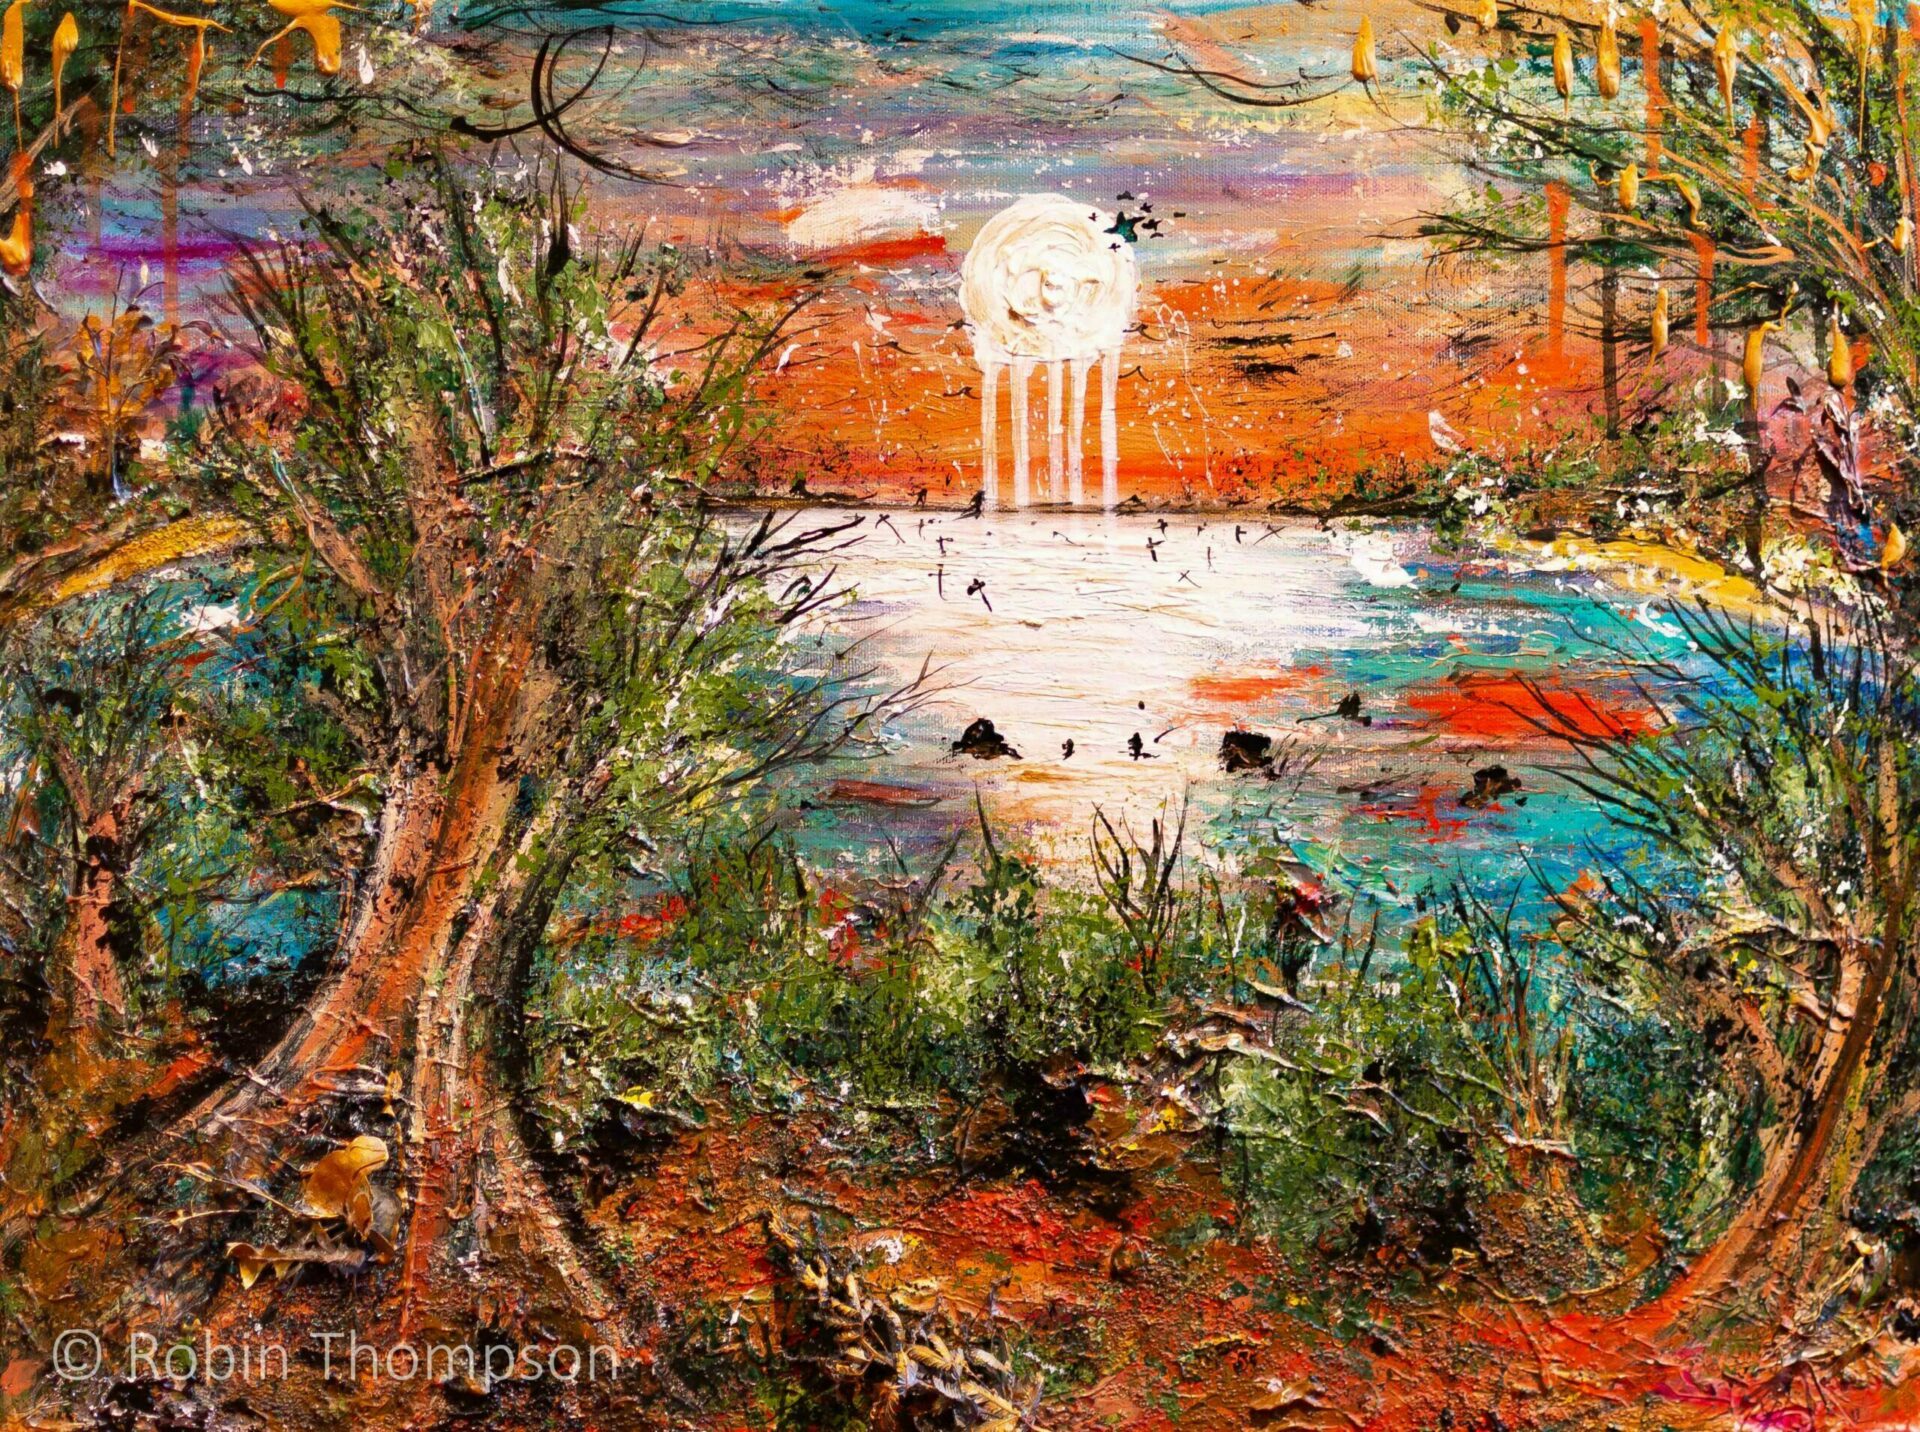 A scene showing a sunset over a lake, with the sun appearing to melt into the lake, and various dripping golds throughout. Abstract trees and shrubbery is shown in the foreground. Everything has a sense of movement and texture in the painting.